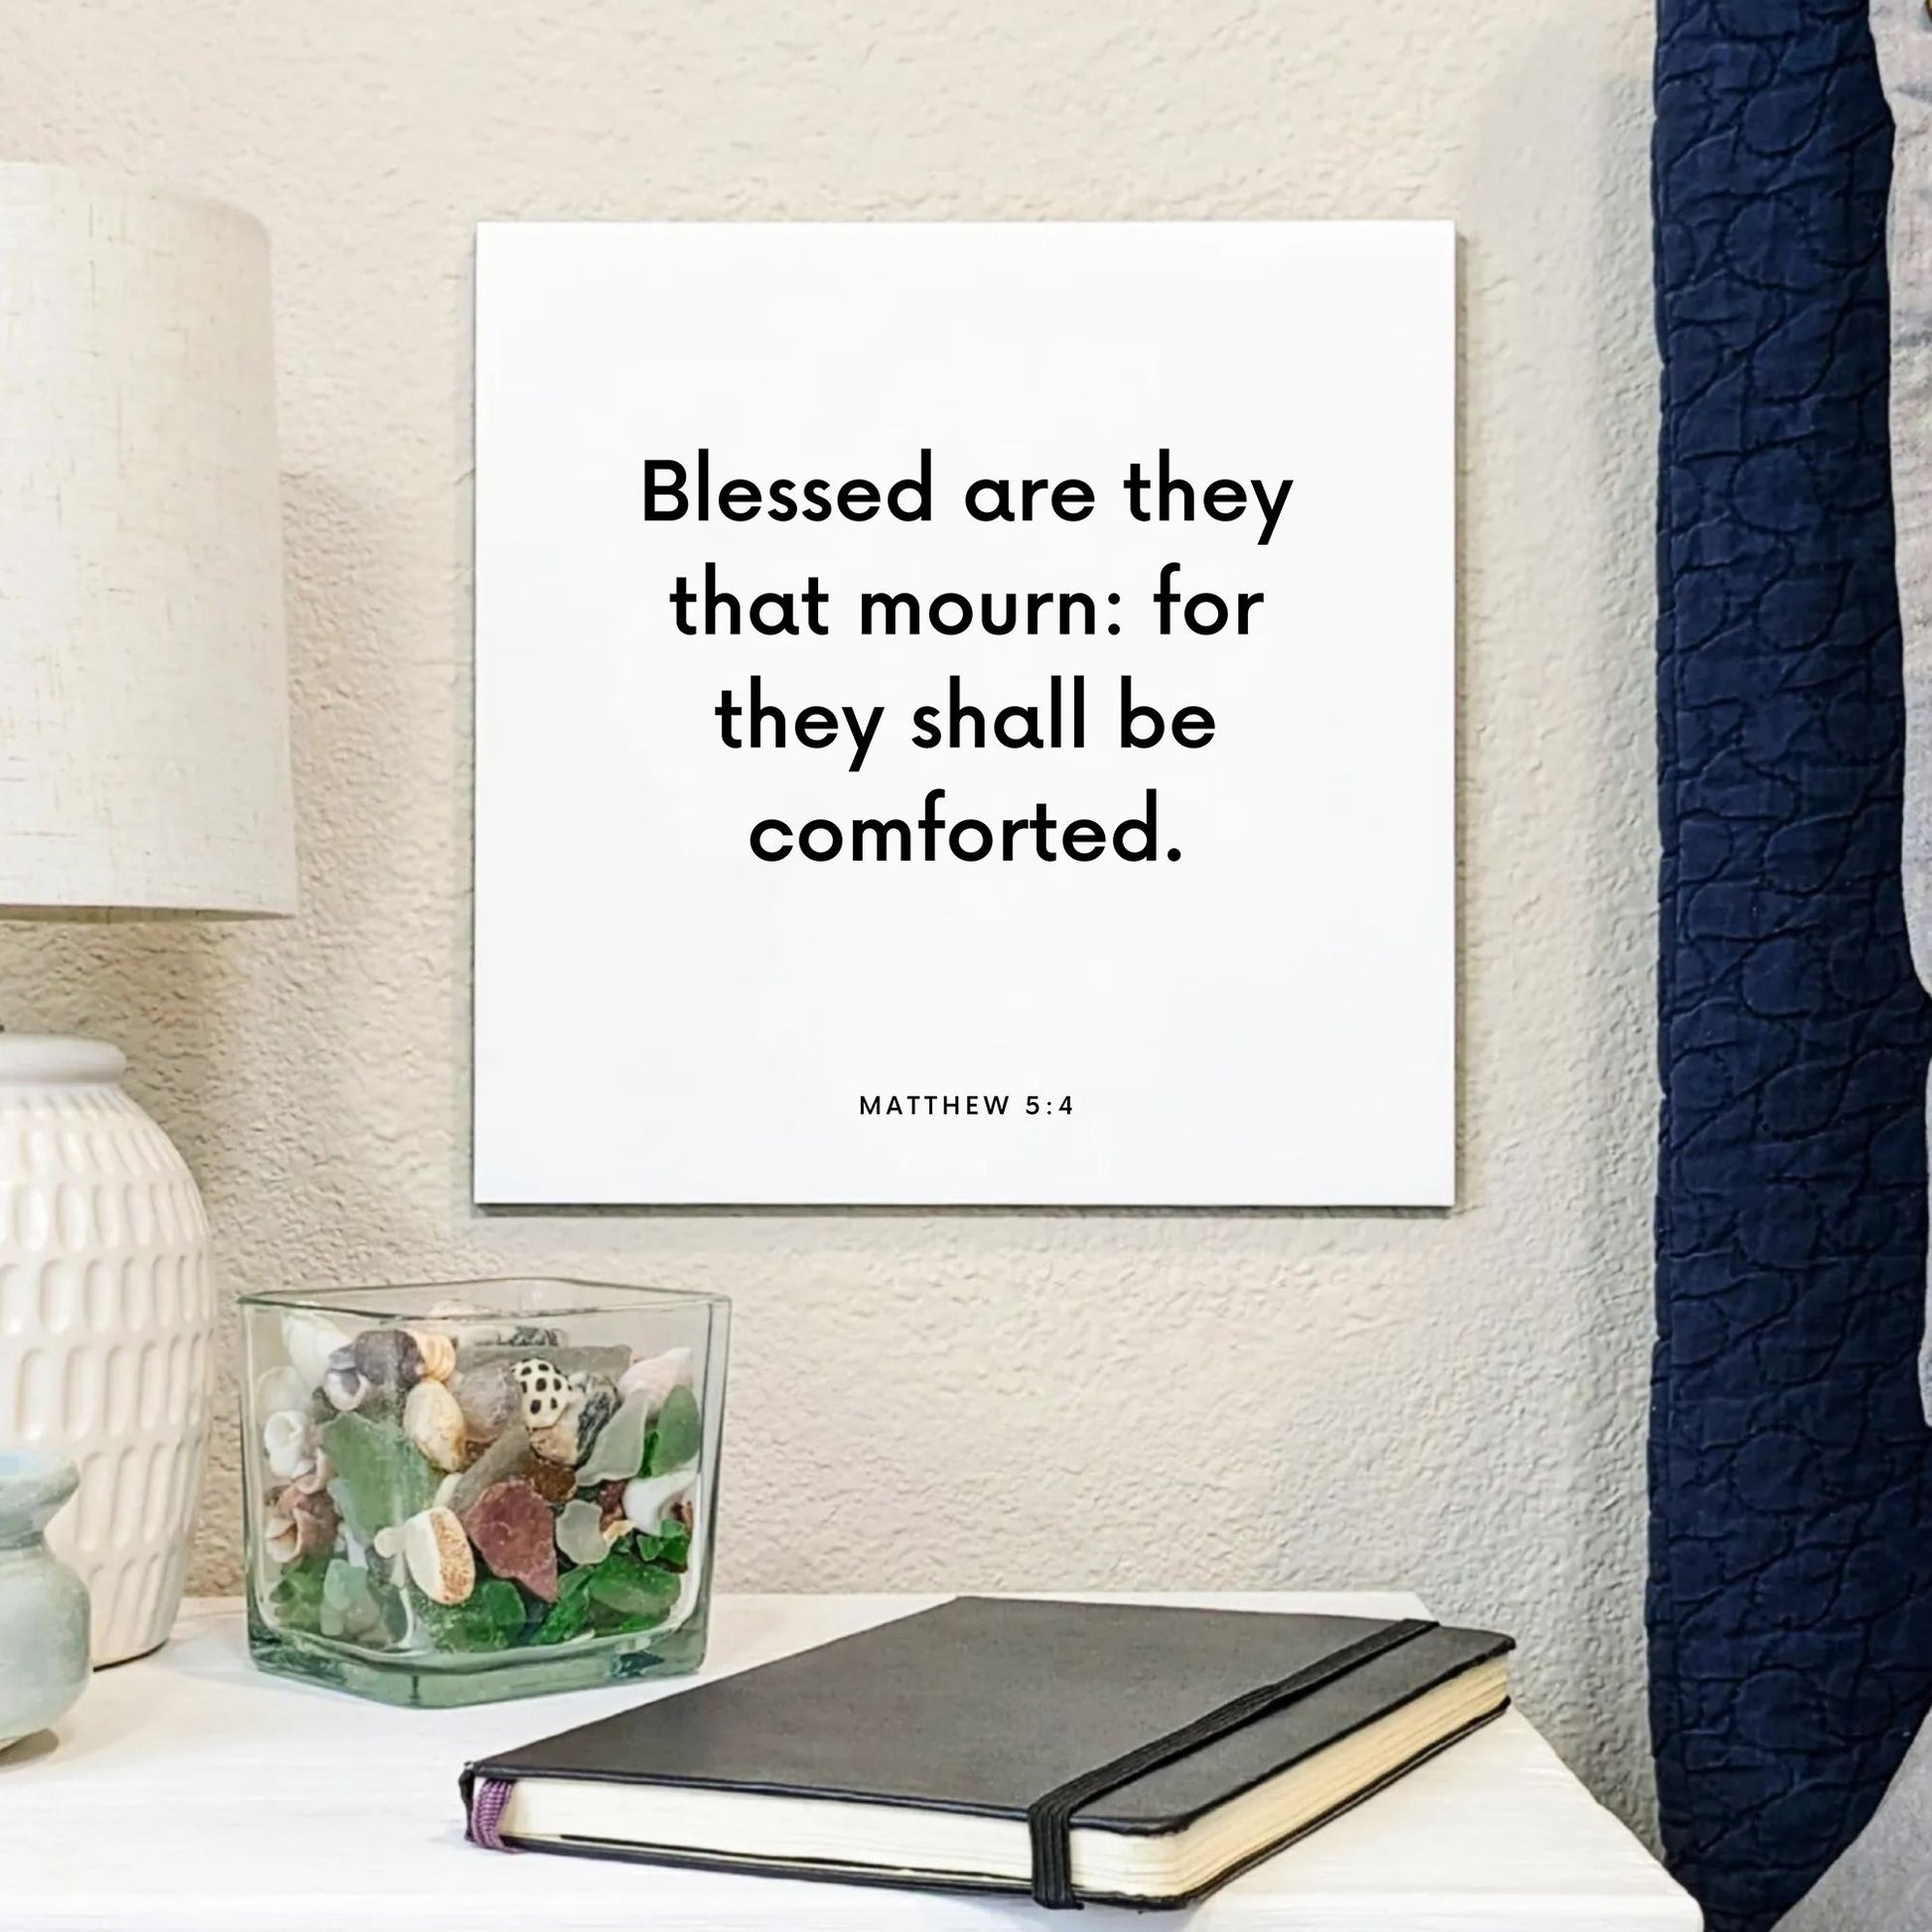 Bedside mouting of the scripture tile for Matthew 5:4 - "Blessed are they that mourn: for they shall be comforted"